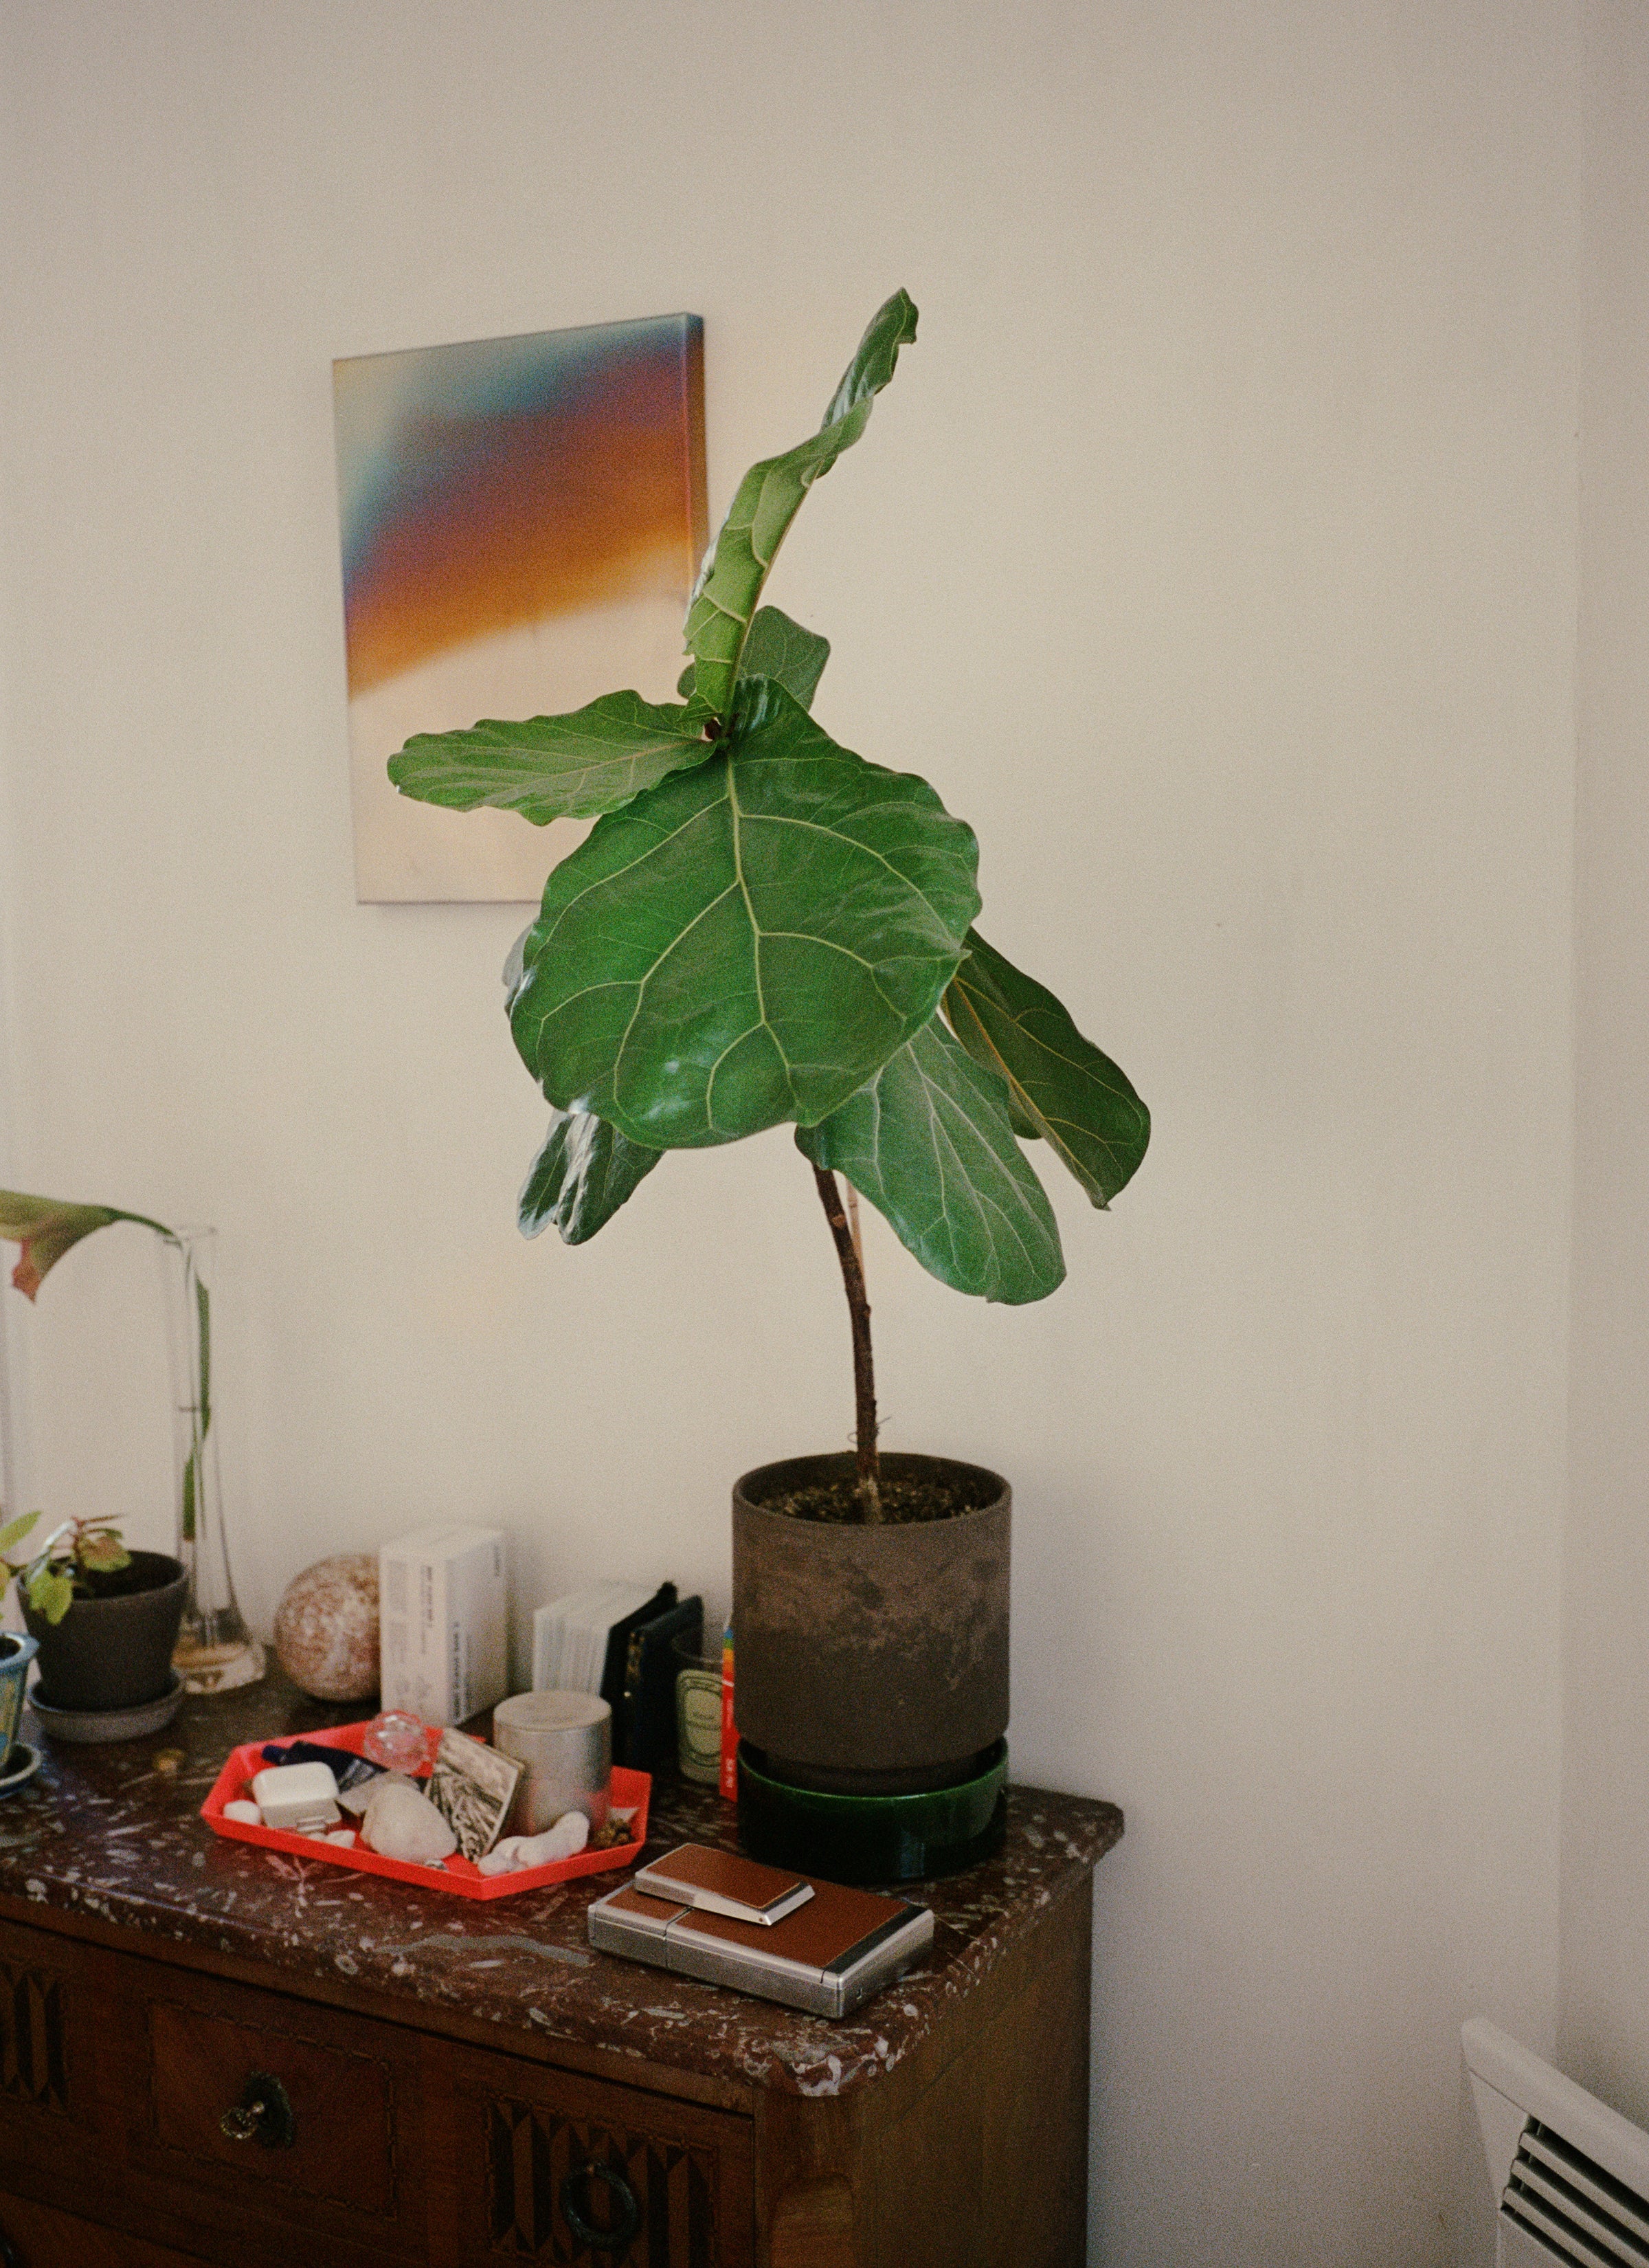 A pot of Fiddle-leaf figs grows in a dark brown pot on the table alongside other stuff and a few pots of plants on the table. There’s a canvas art hung on the wall.